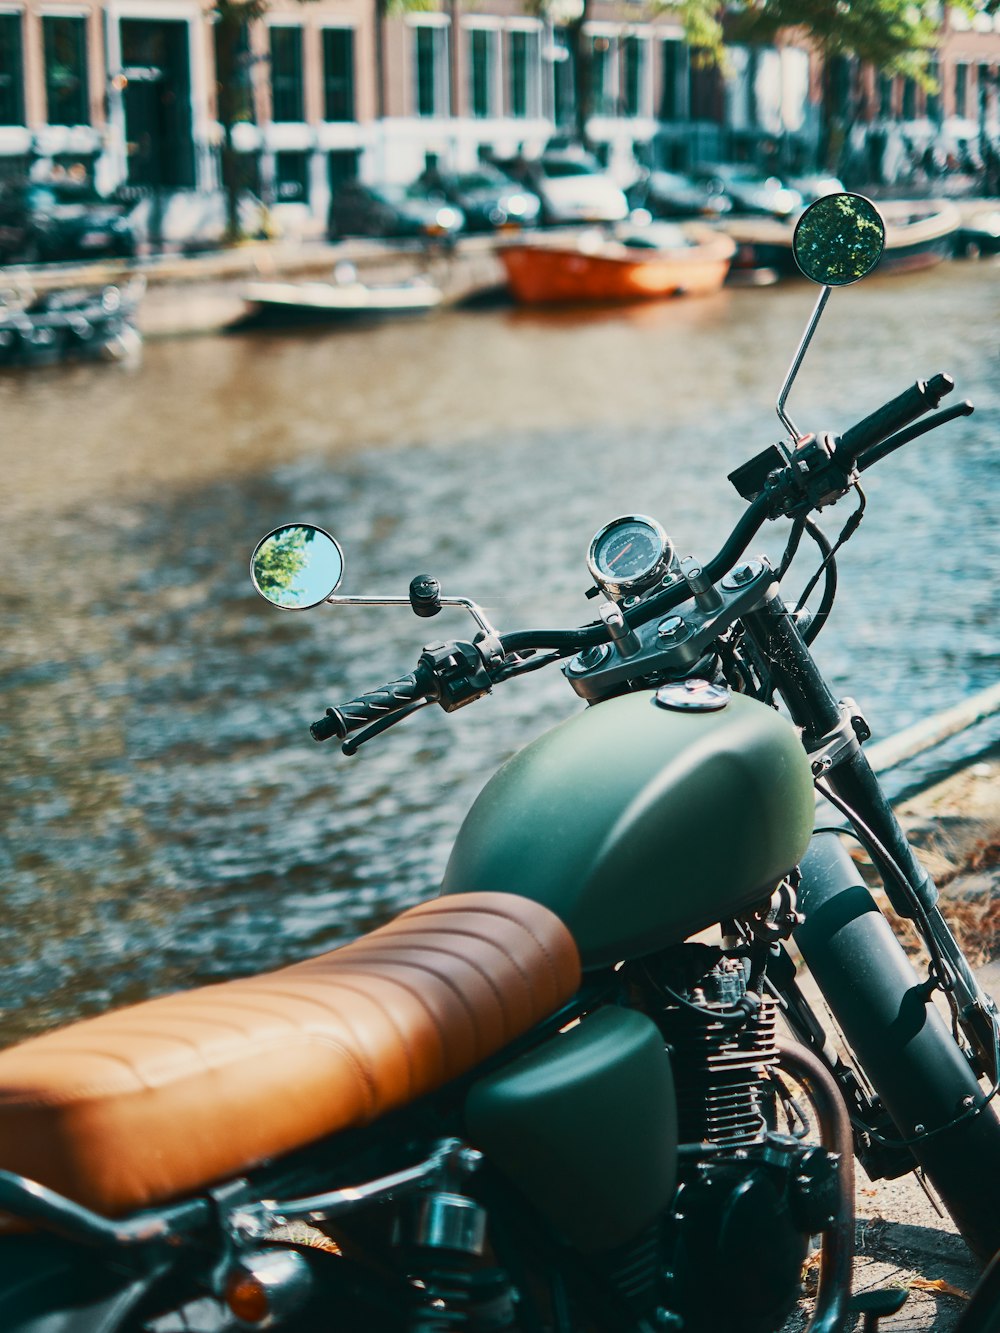 brown and green motorcycle